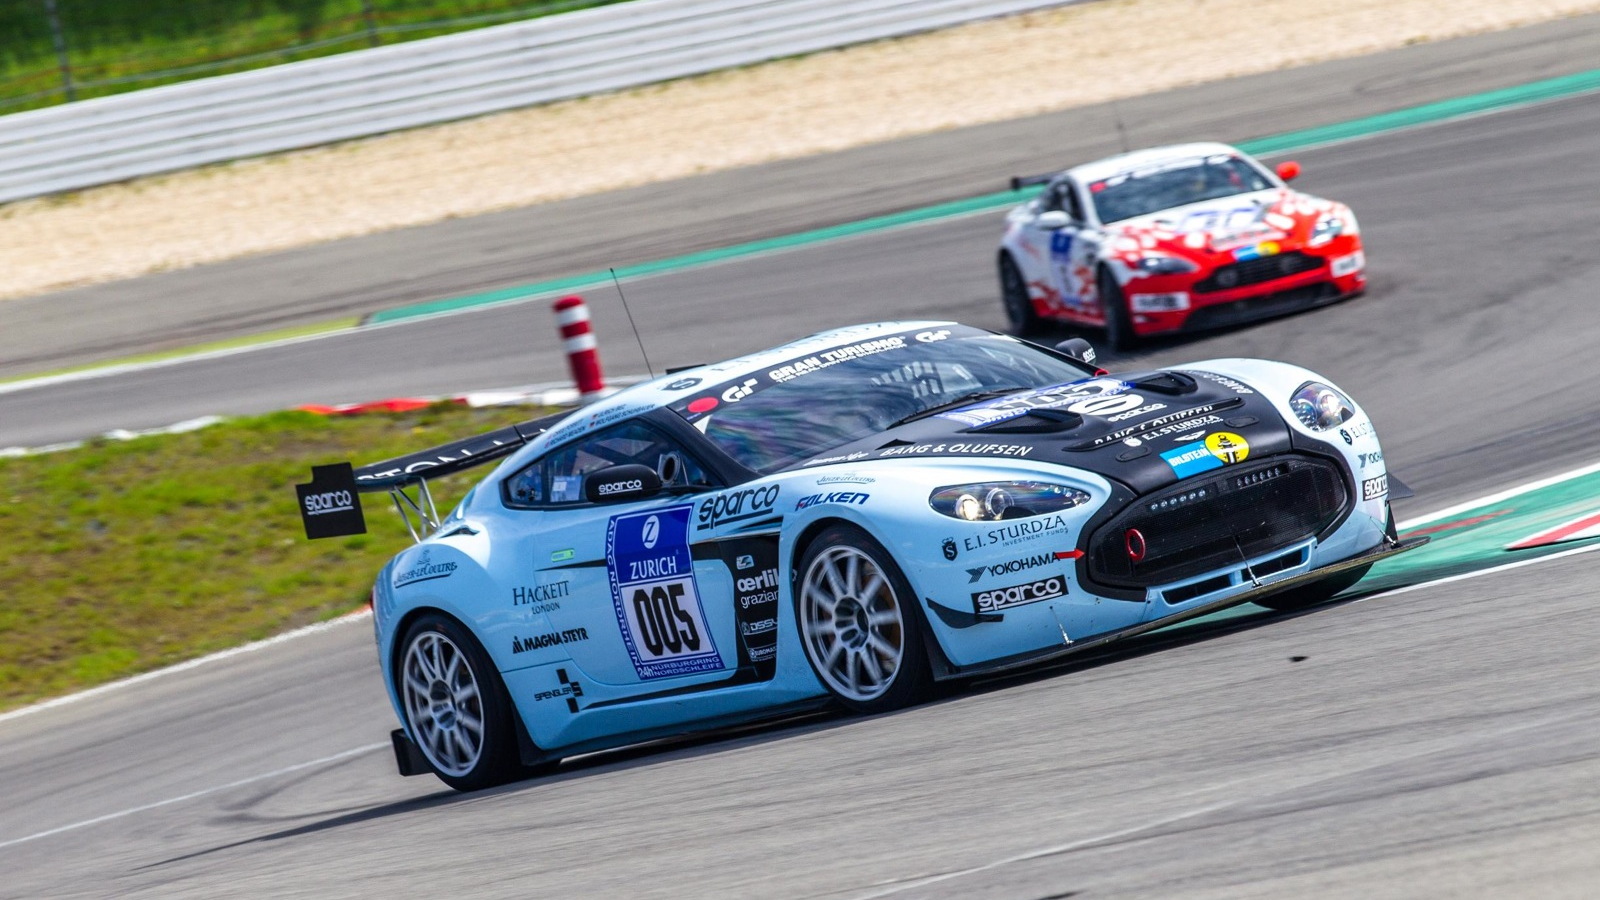 Entrants in the inaugural Aston Martin Racing Festival of Le Mans